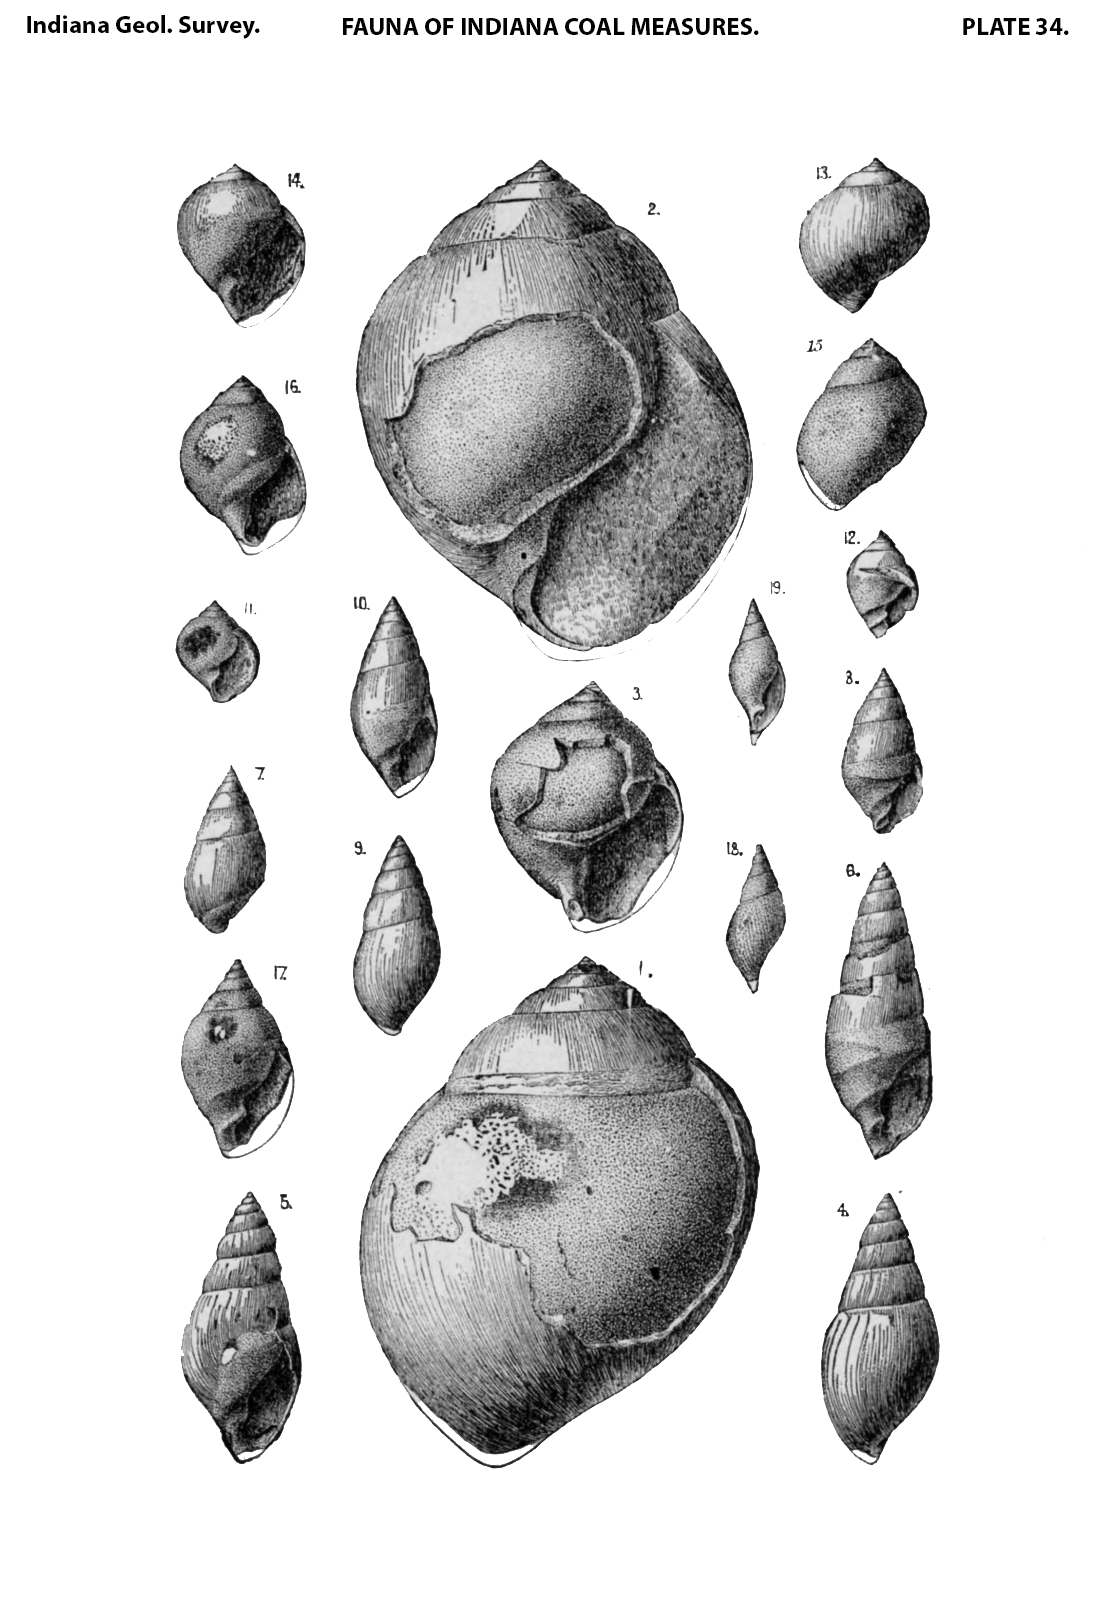 Plate 34 from the fauna of the Indiana Coal Measures. Published by the Indiana Geological Survey in 1884. Many examples of what is known today as the fossil gastropod Strobeus are shown.